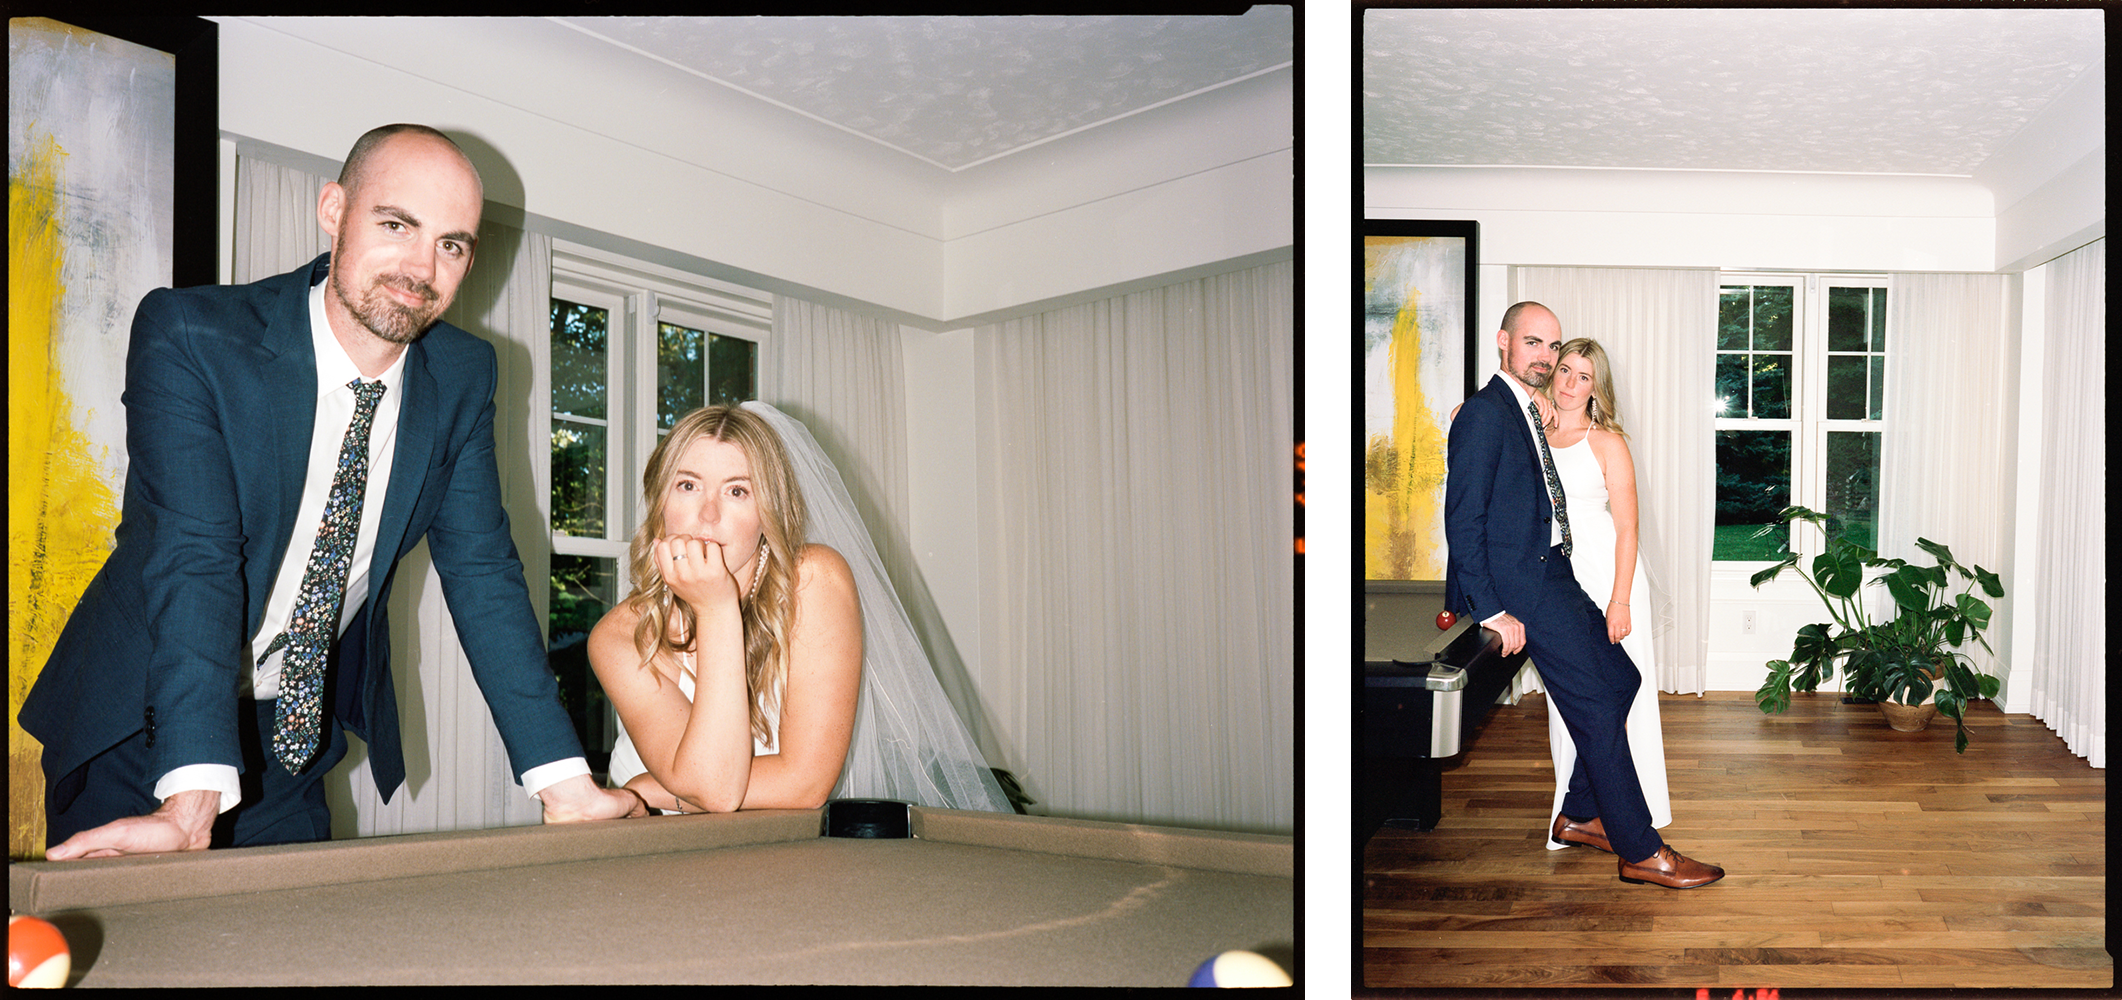 Backyard-Elopement-on-Film-Analog-Pool-Party-73.PNG